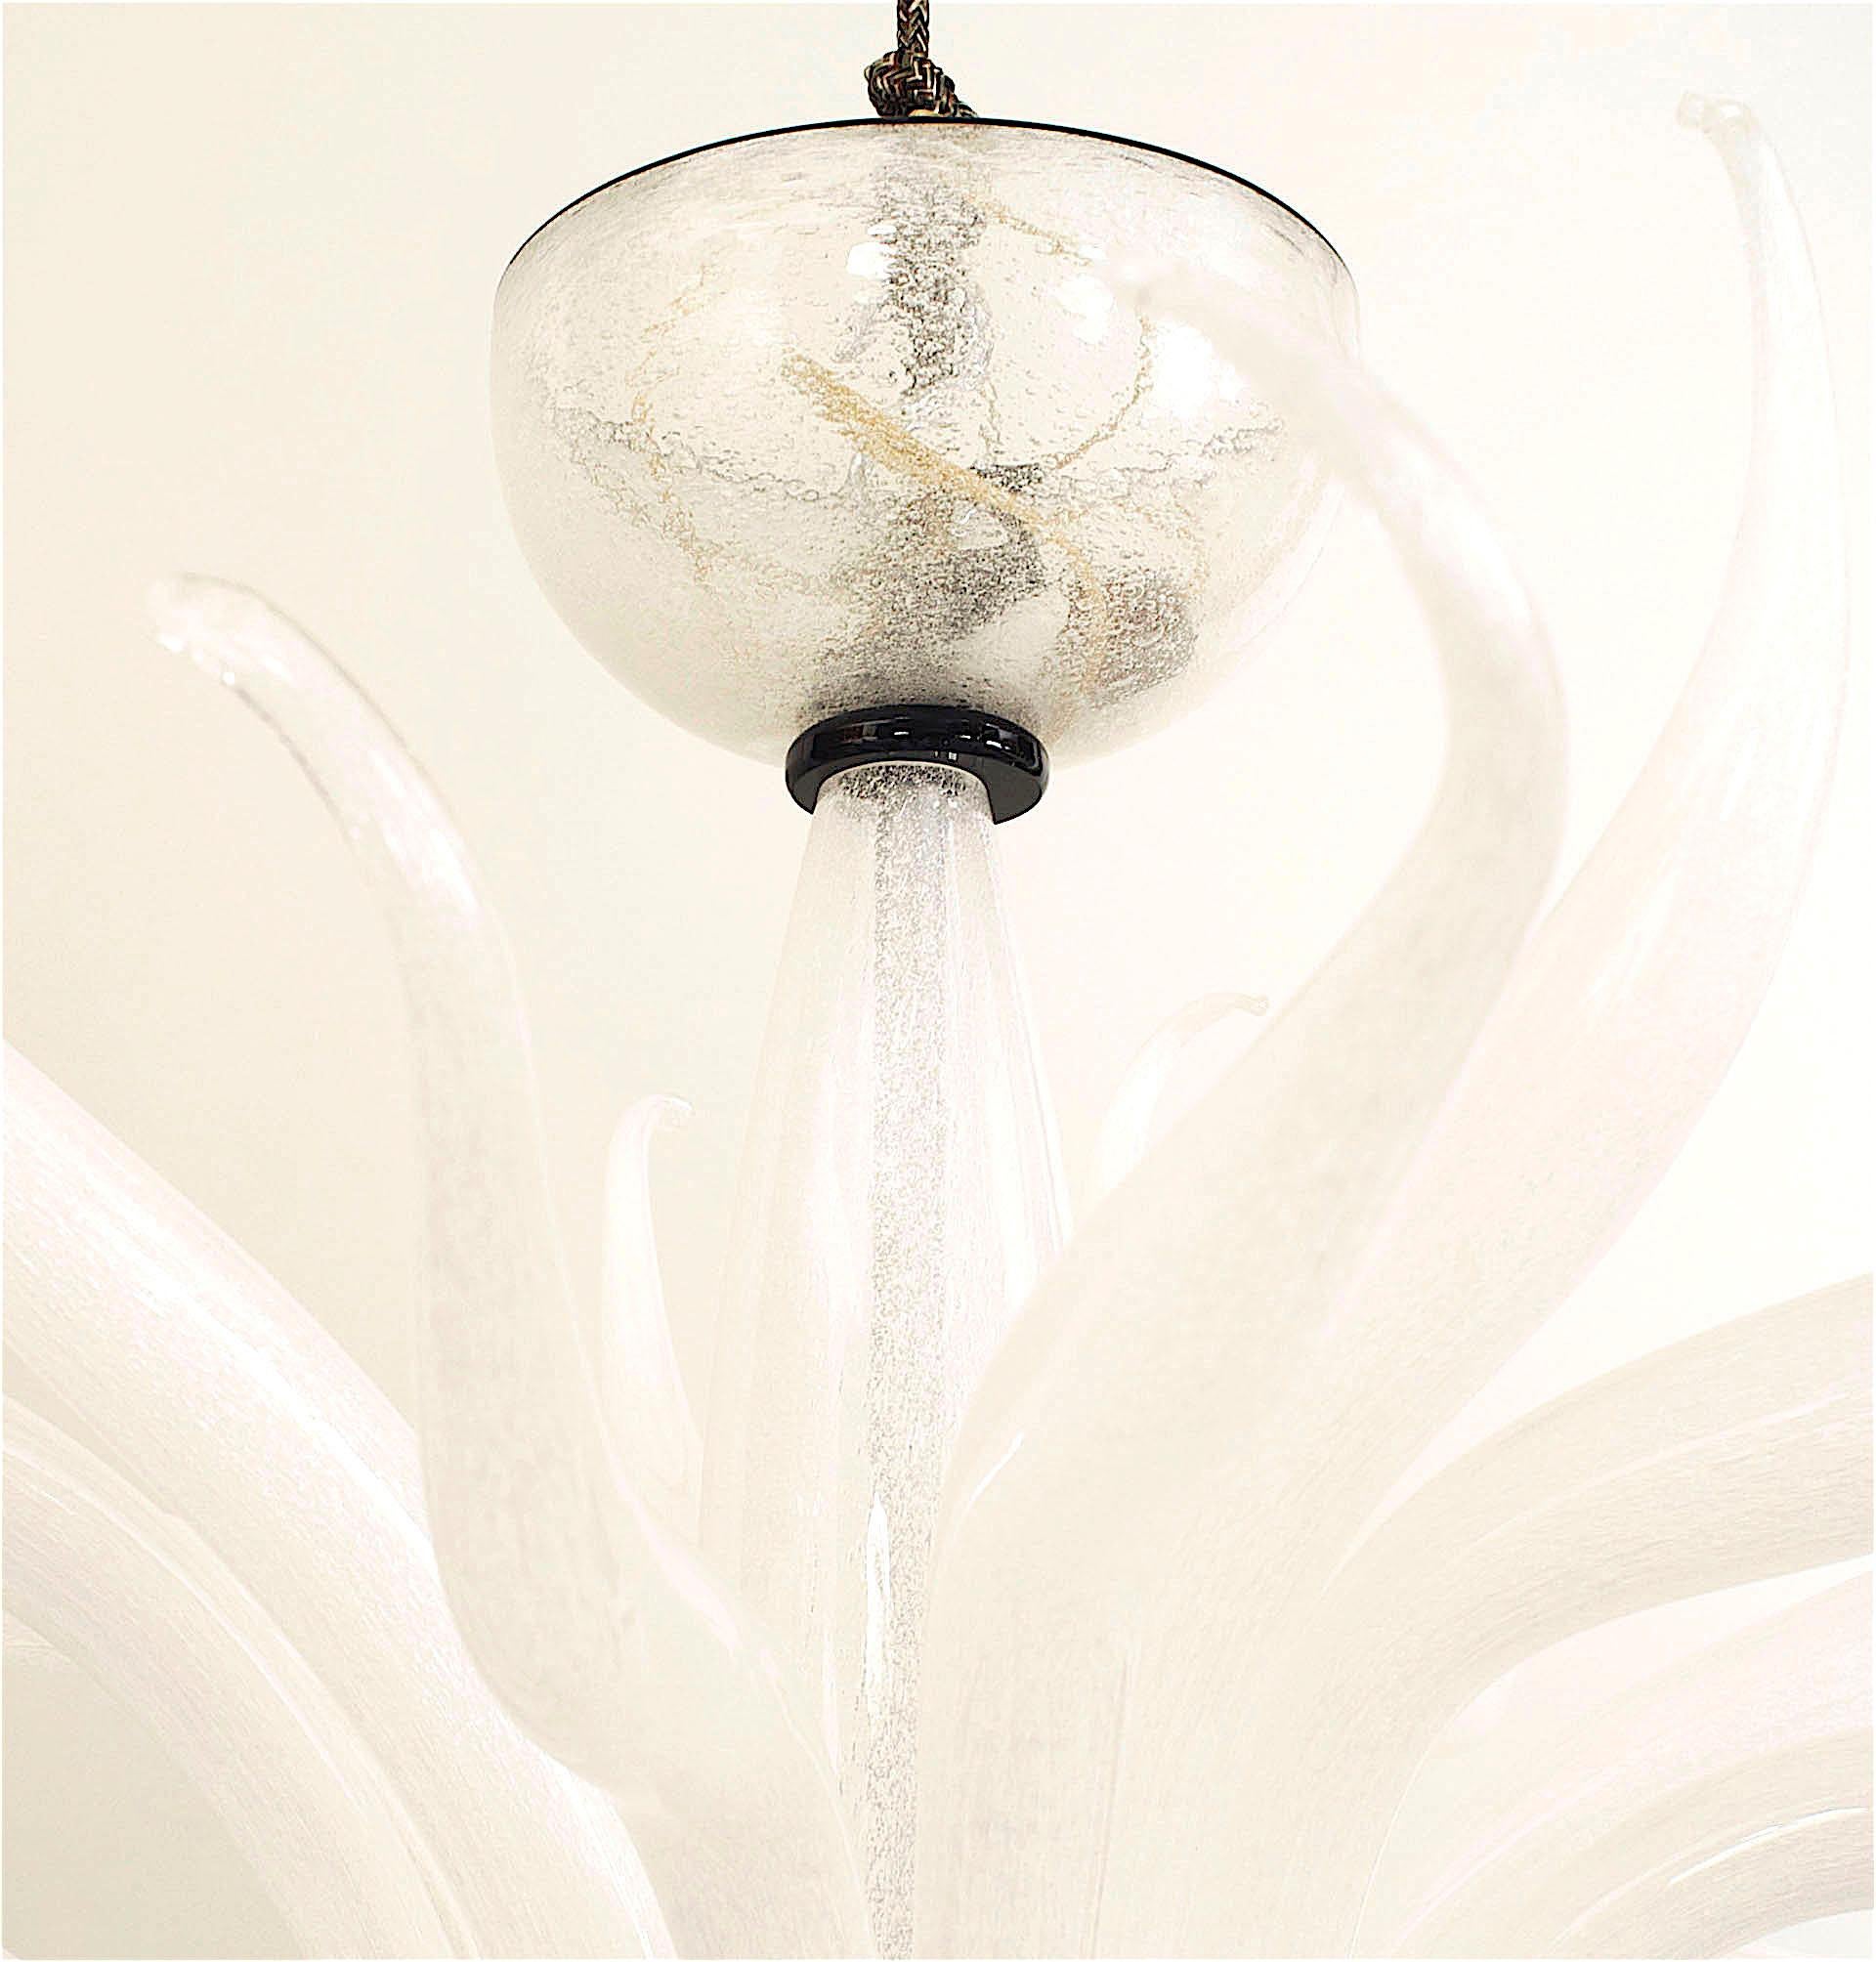 Post-War Design Italian Venetian Murano textured white glass chandelier with multiple scroll arms emanating from a center shaft with a bowl bottom having a black glass finial & trim.
